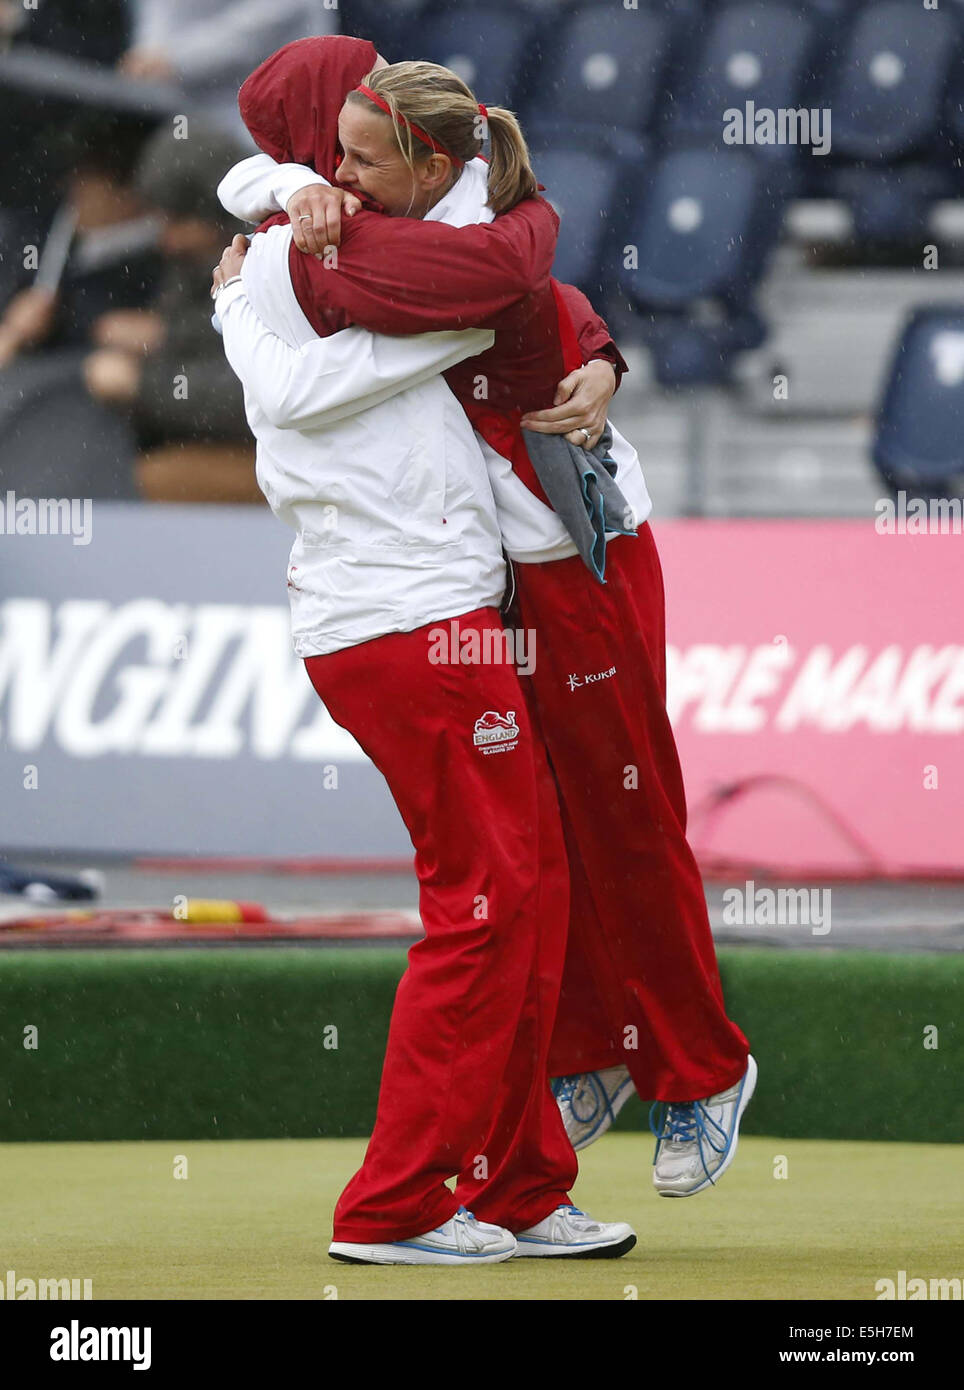 Glasgow, Scotland. 31st July, 2014. Ellen Falkner (R) of England celebrates with her teammate Sian Gordon after the women's triples gold medal match of Lawn Bowls between England and Australia on day 8 of the Glasgow 2014 Commonwealth Games at Kelvingrove Lawn Bowls Centre in Glasgow, Scotland, on July 31, 2014. England claimed the title with 22-4. Credit:  Wang Lili/Xinhua/Alamy Live News Stock Photo